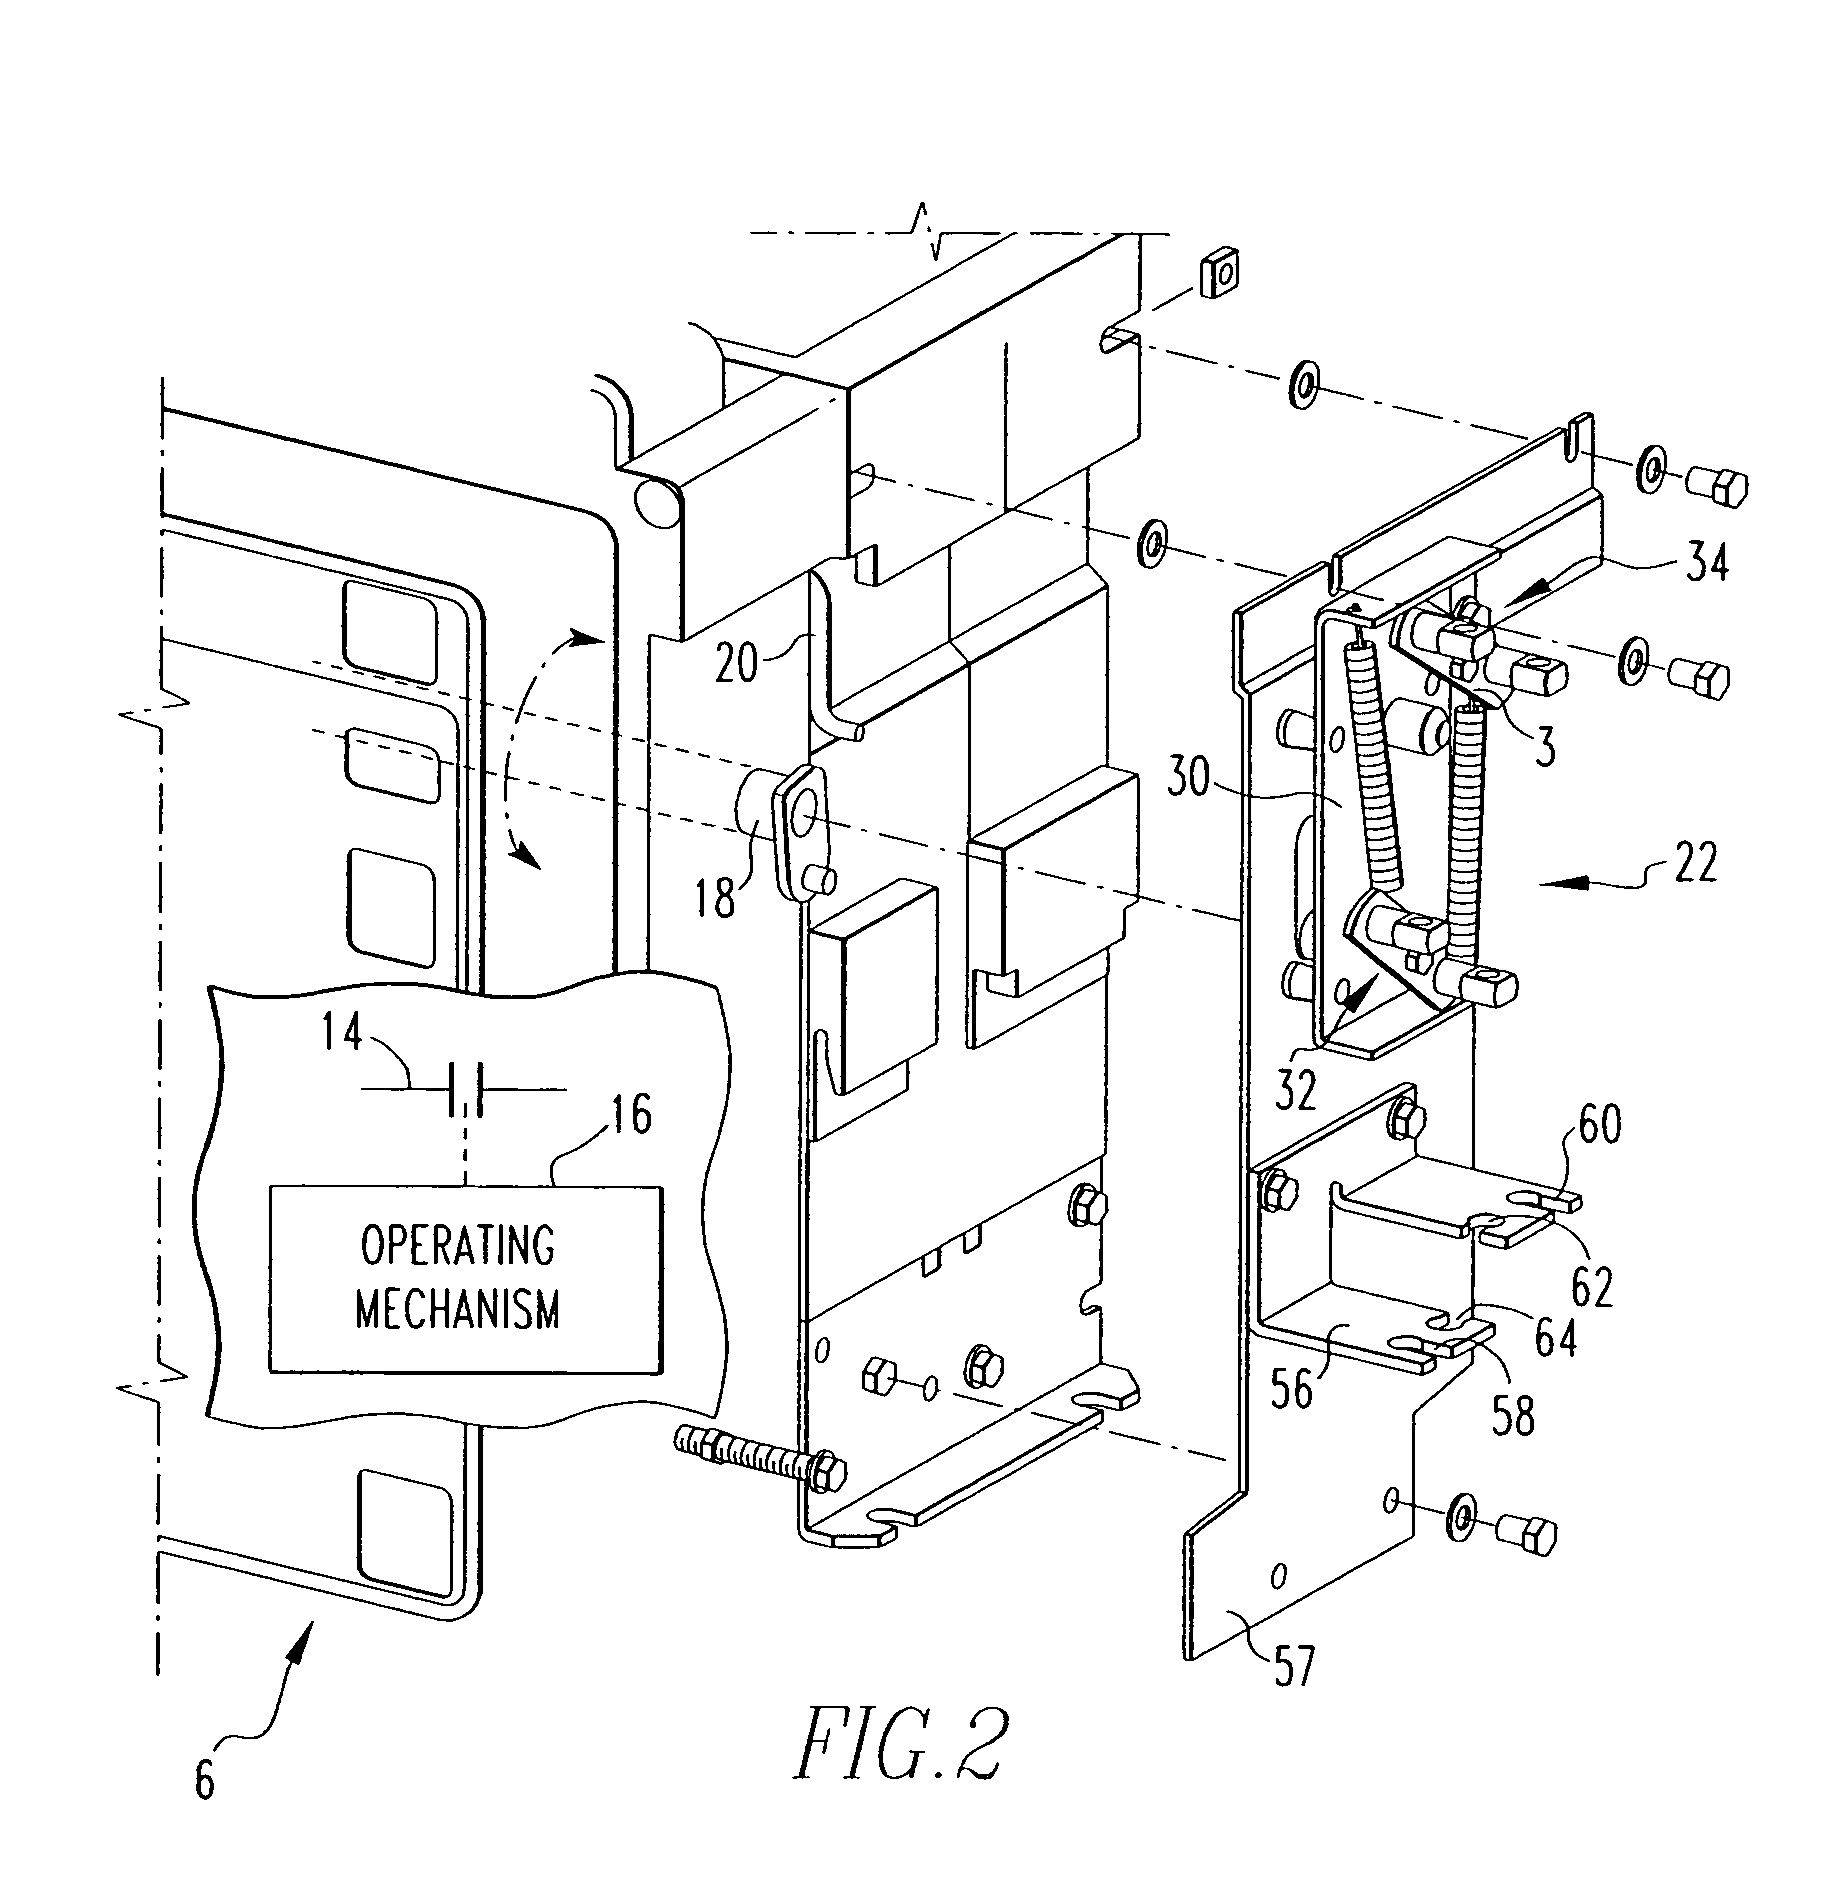 Four-way interlock system and bypass transfer switch employing the same